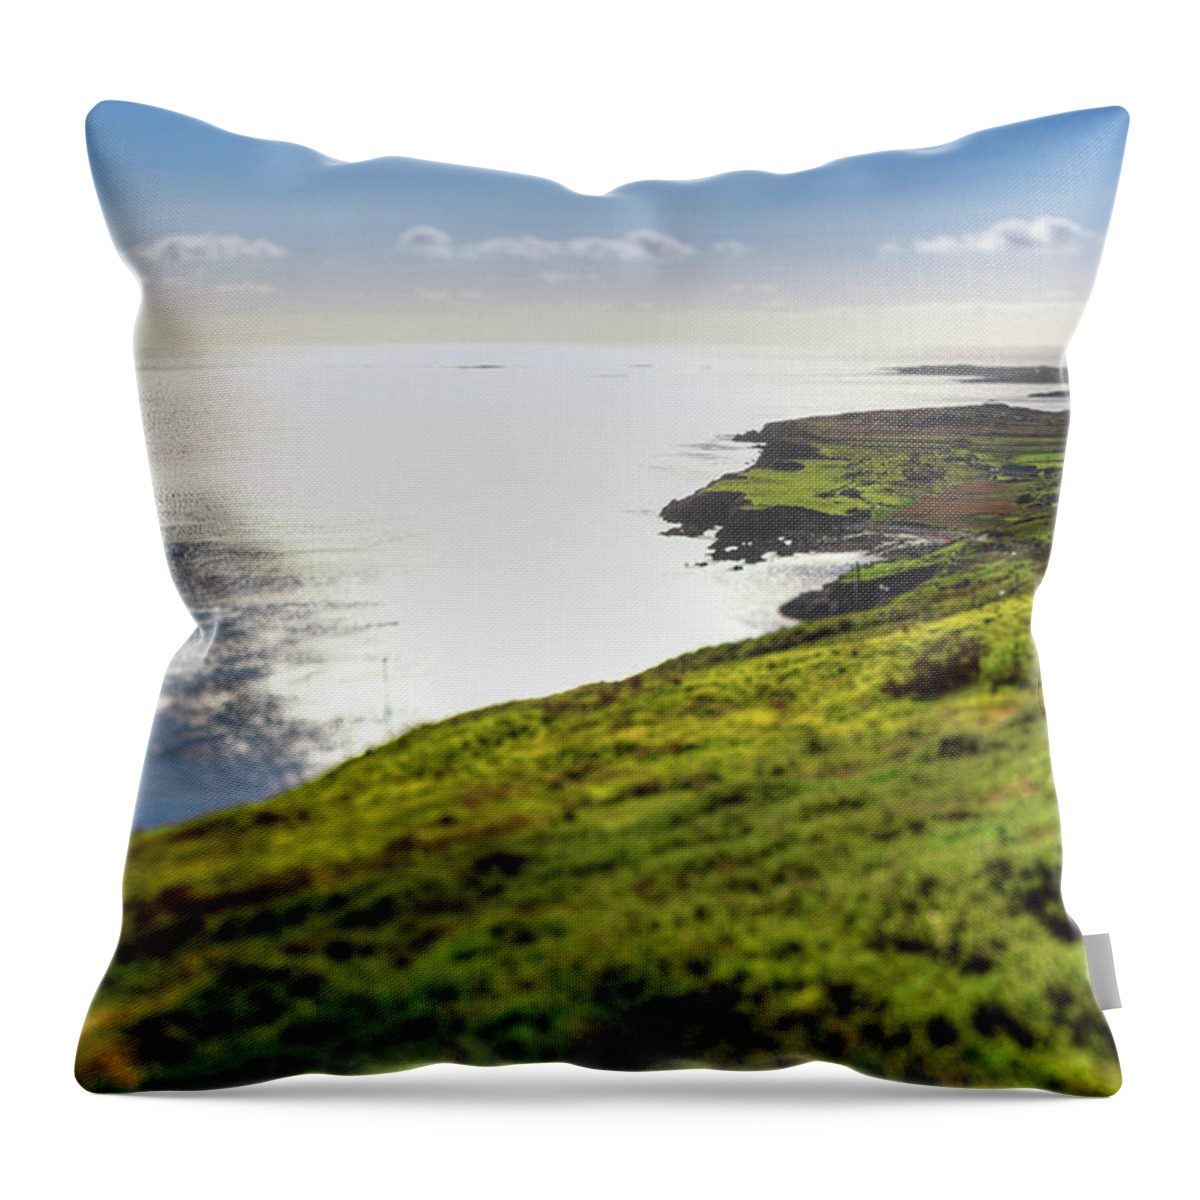 Scenics Throw Pillow featuring the photograph Ireland, Connemara Landscape by Moreiso